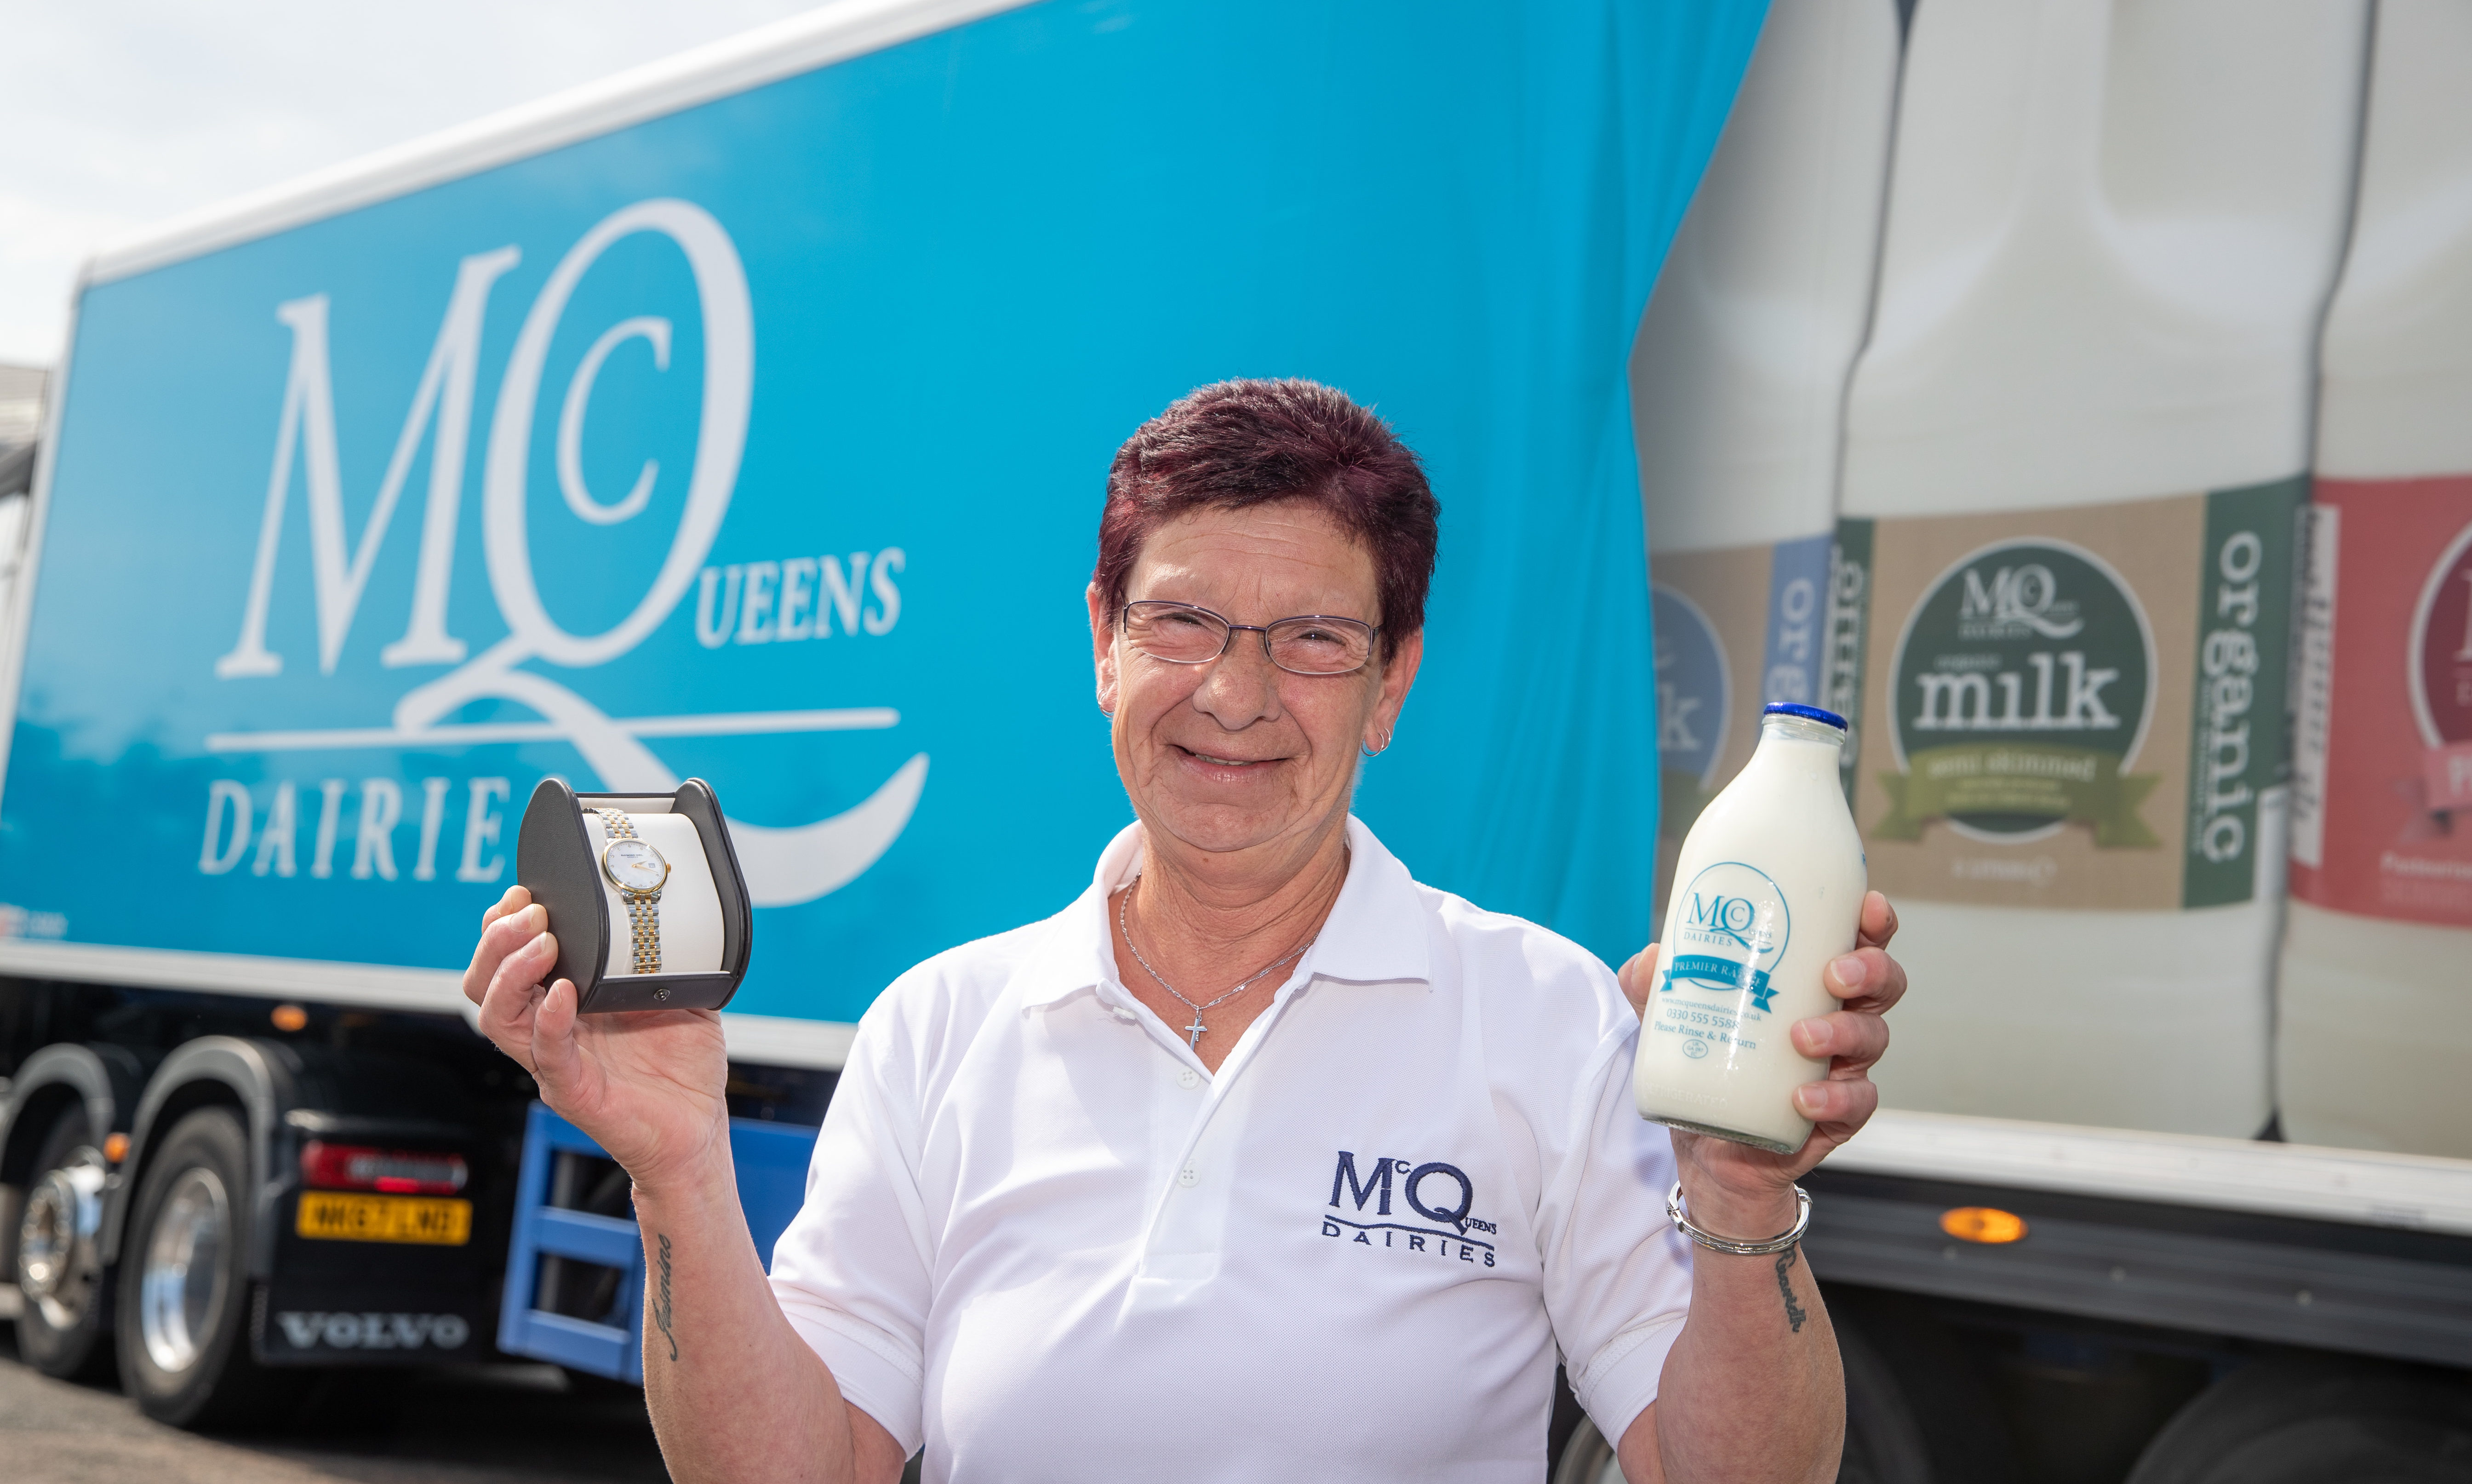 Davina has been a milk lady for 40 years.